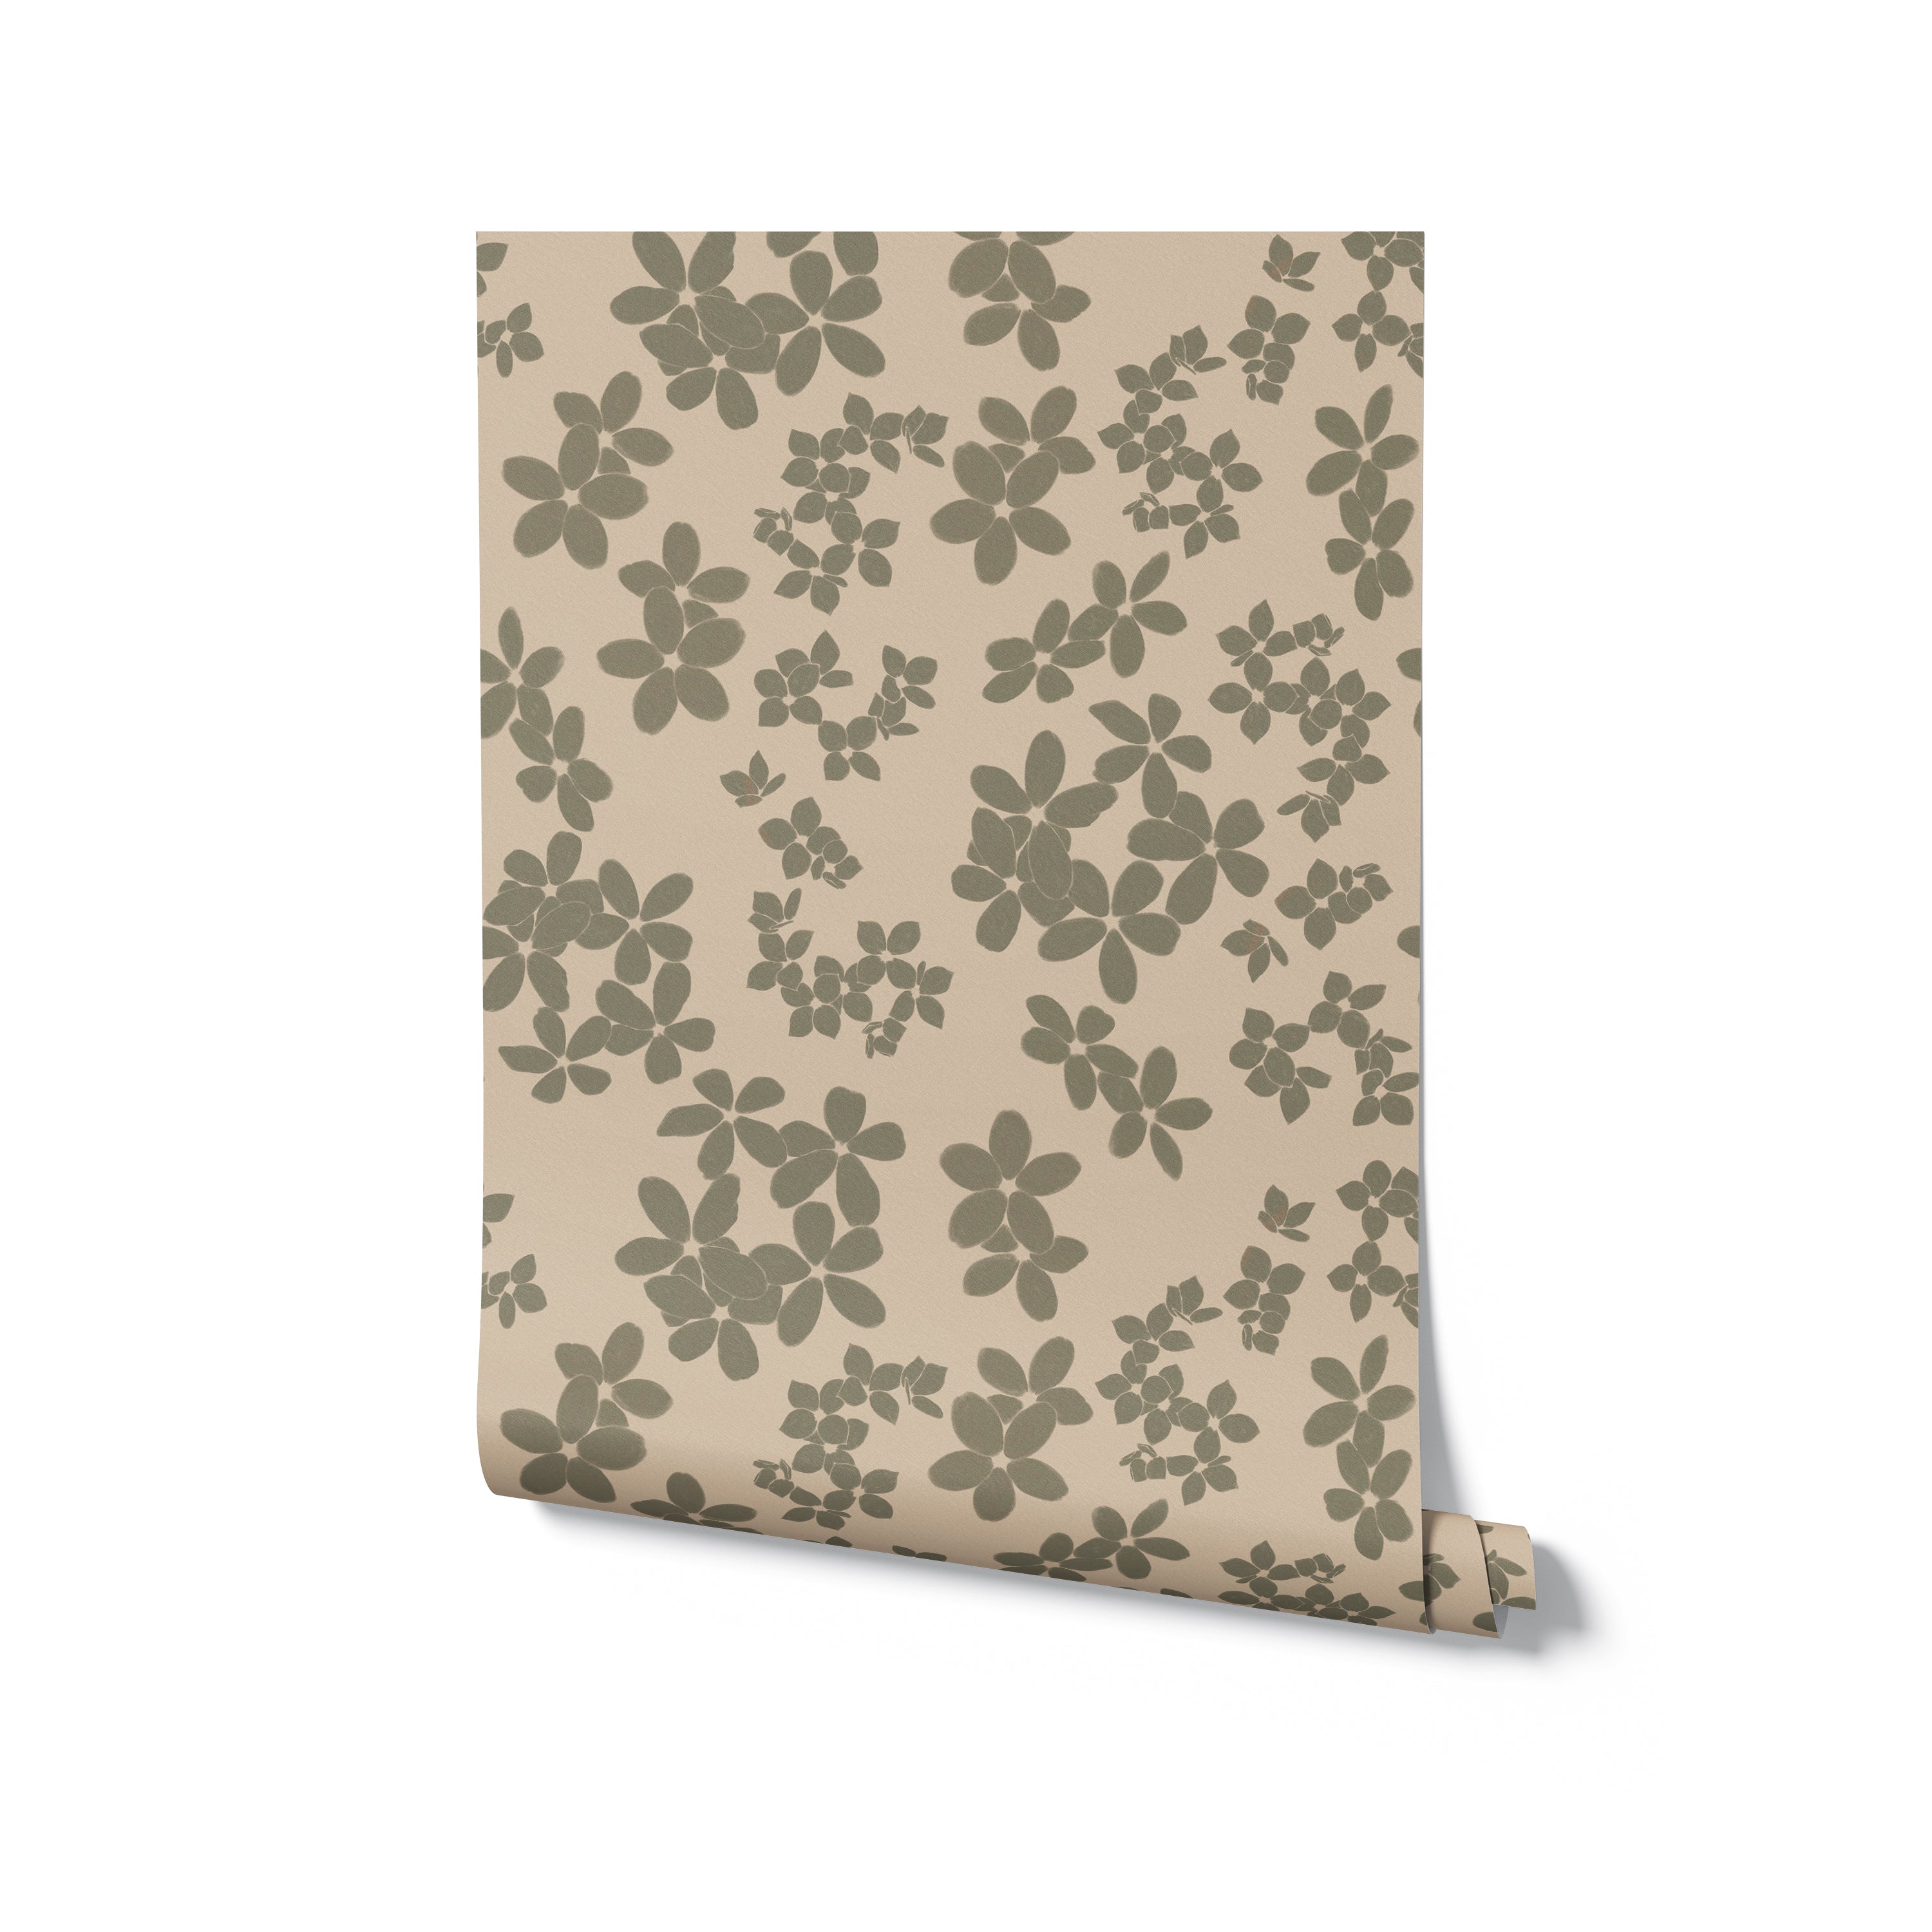 A roll of wallpaper featuring a repeating design of small, olive green clover-like flowers on a light beige background, rolled slightly at the corner to give a three-dimensional effect.